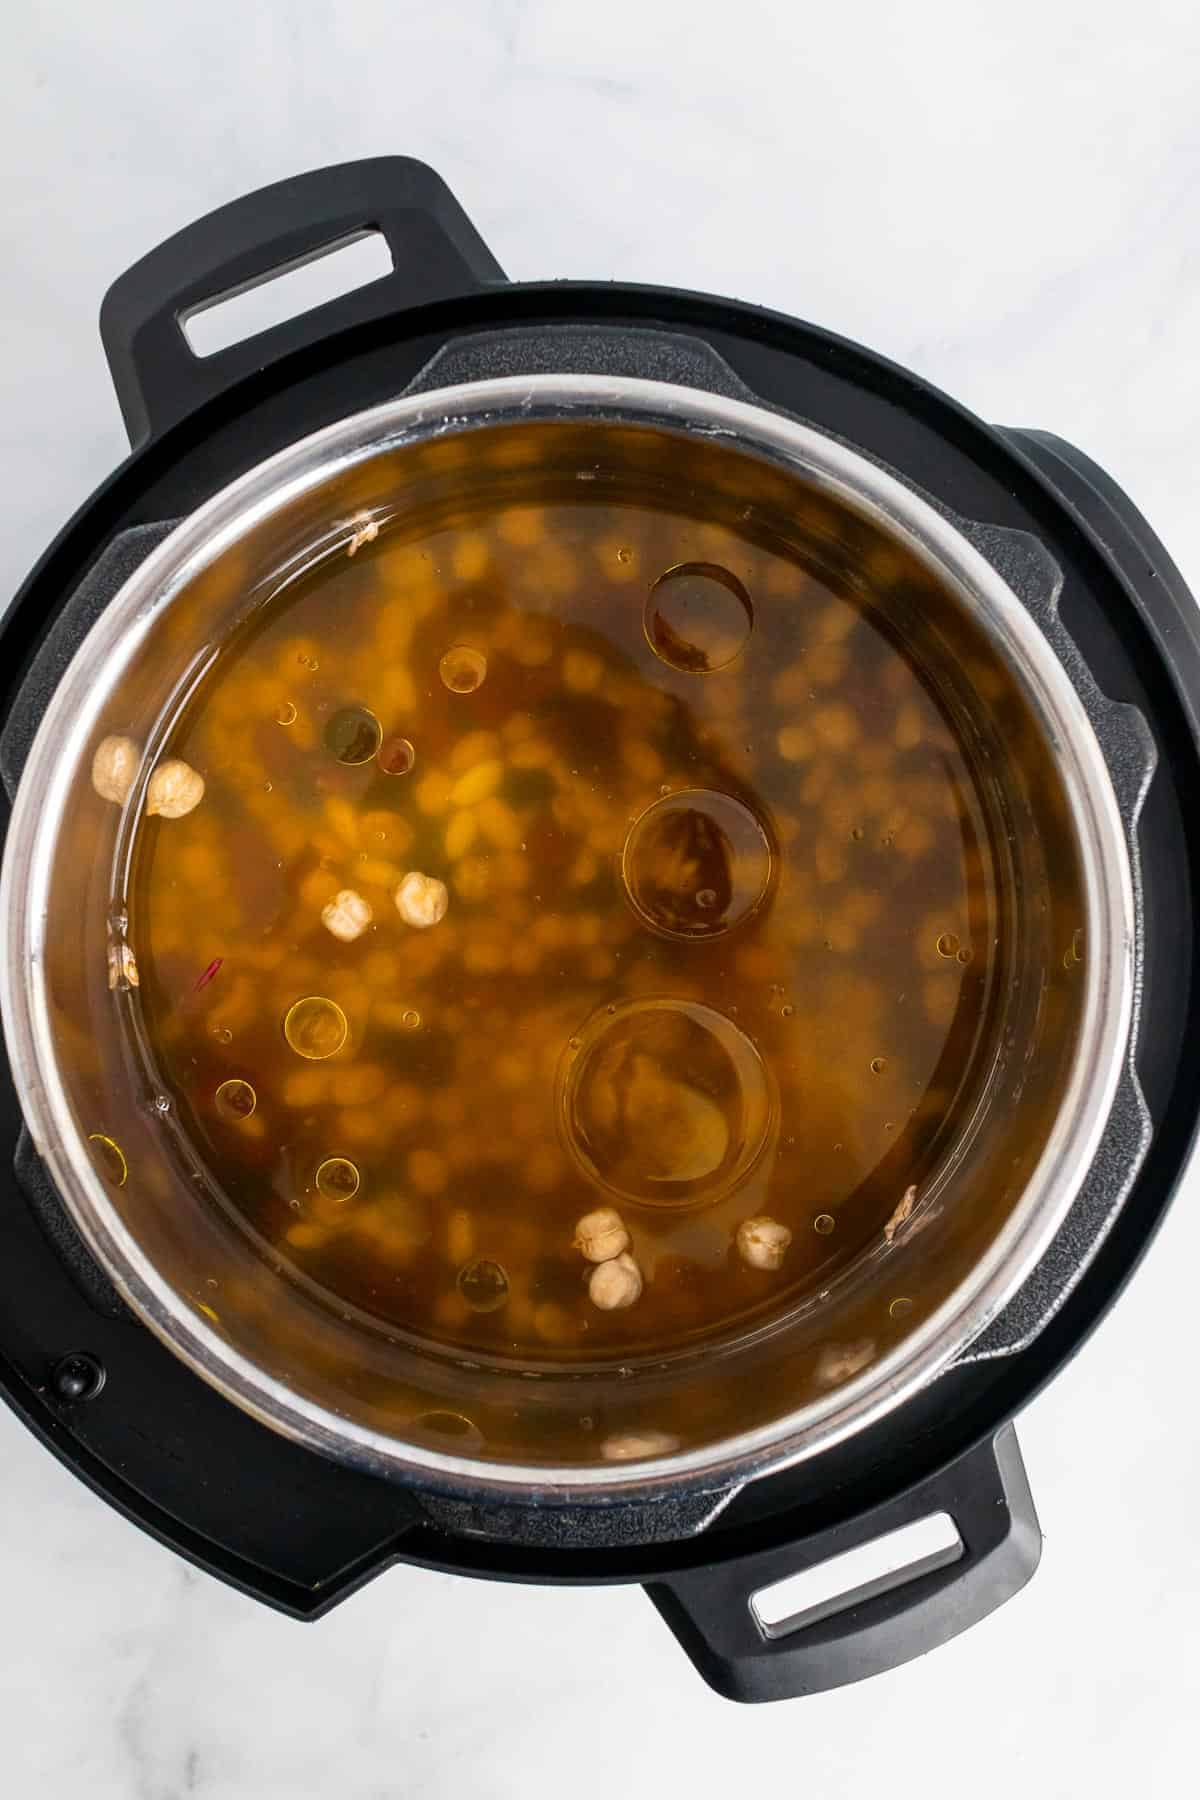 Beans, broth, and olive oil in a pressure cooker